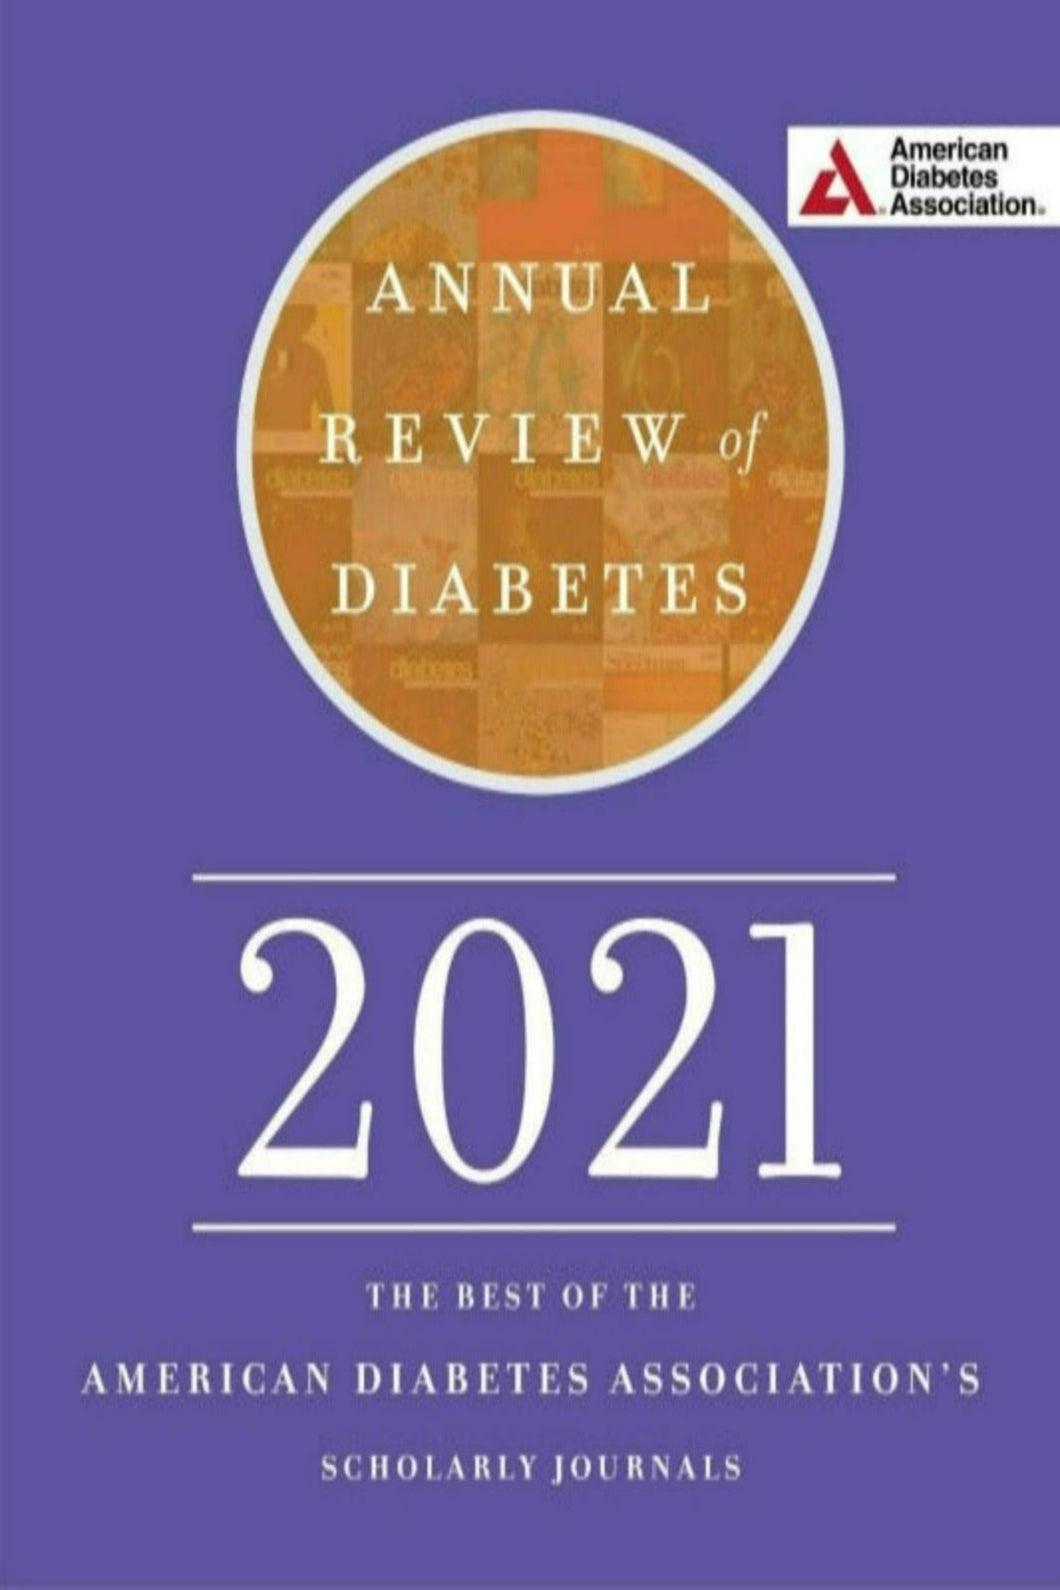 Annual Review of Diabetes 2021